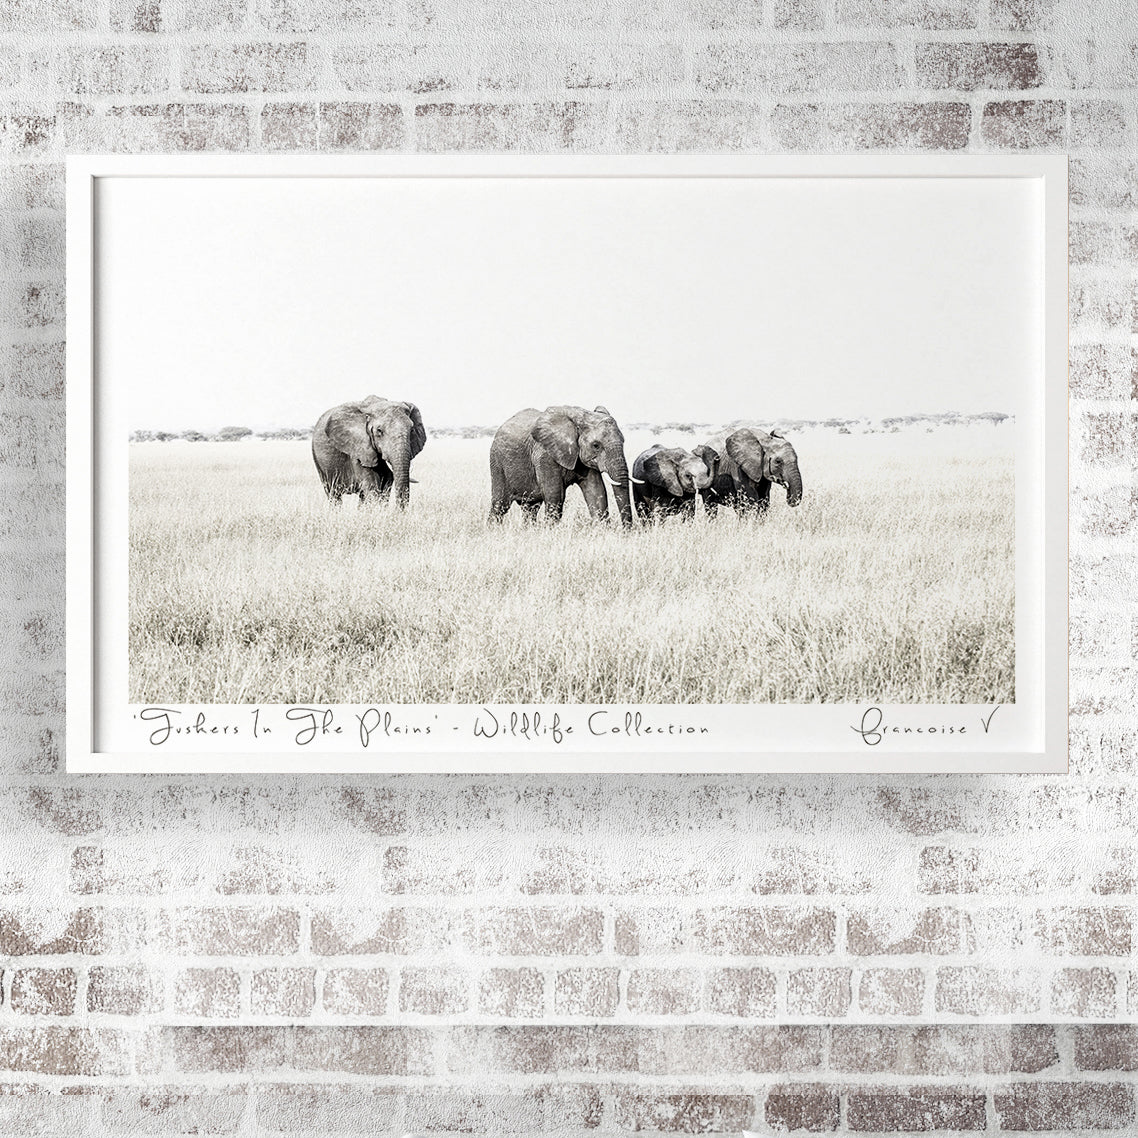 TUSKERS IN THE PLAINS 150 x 90cm